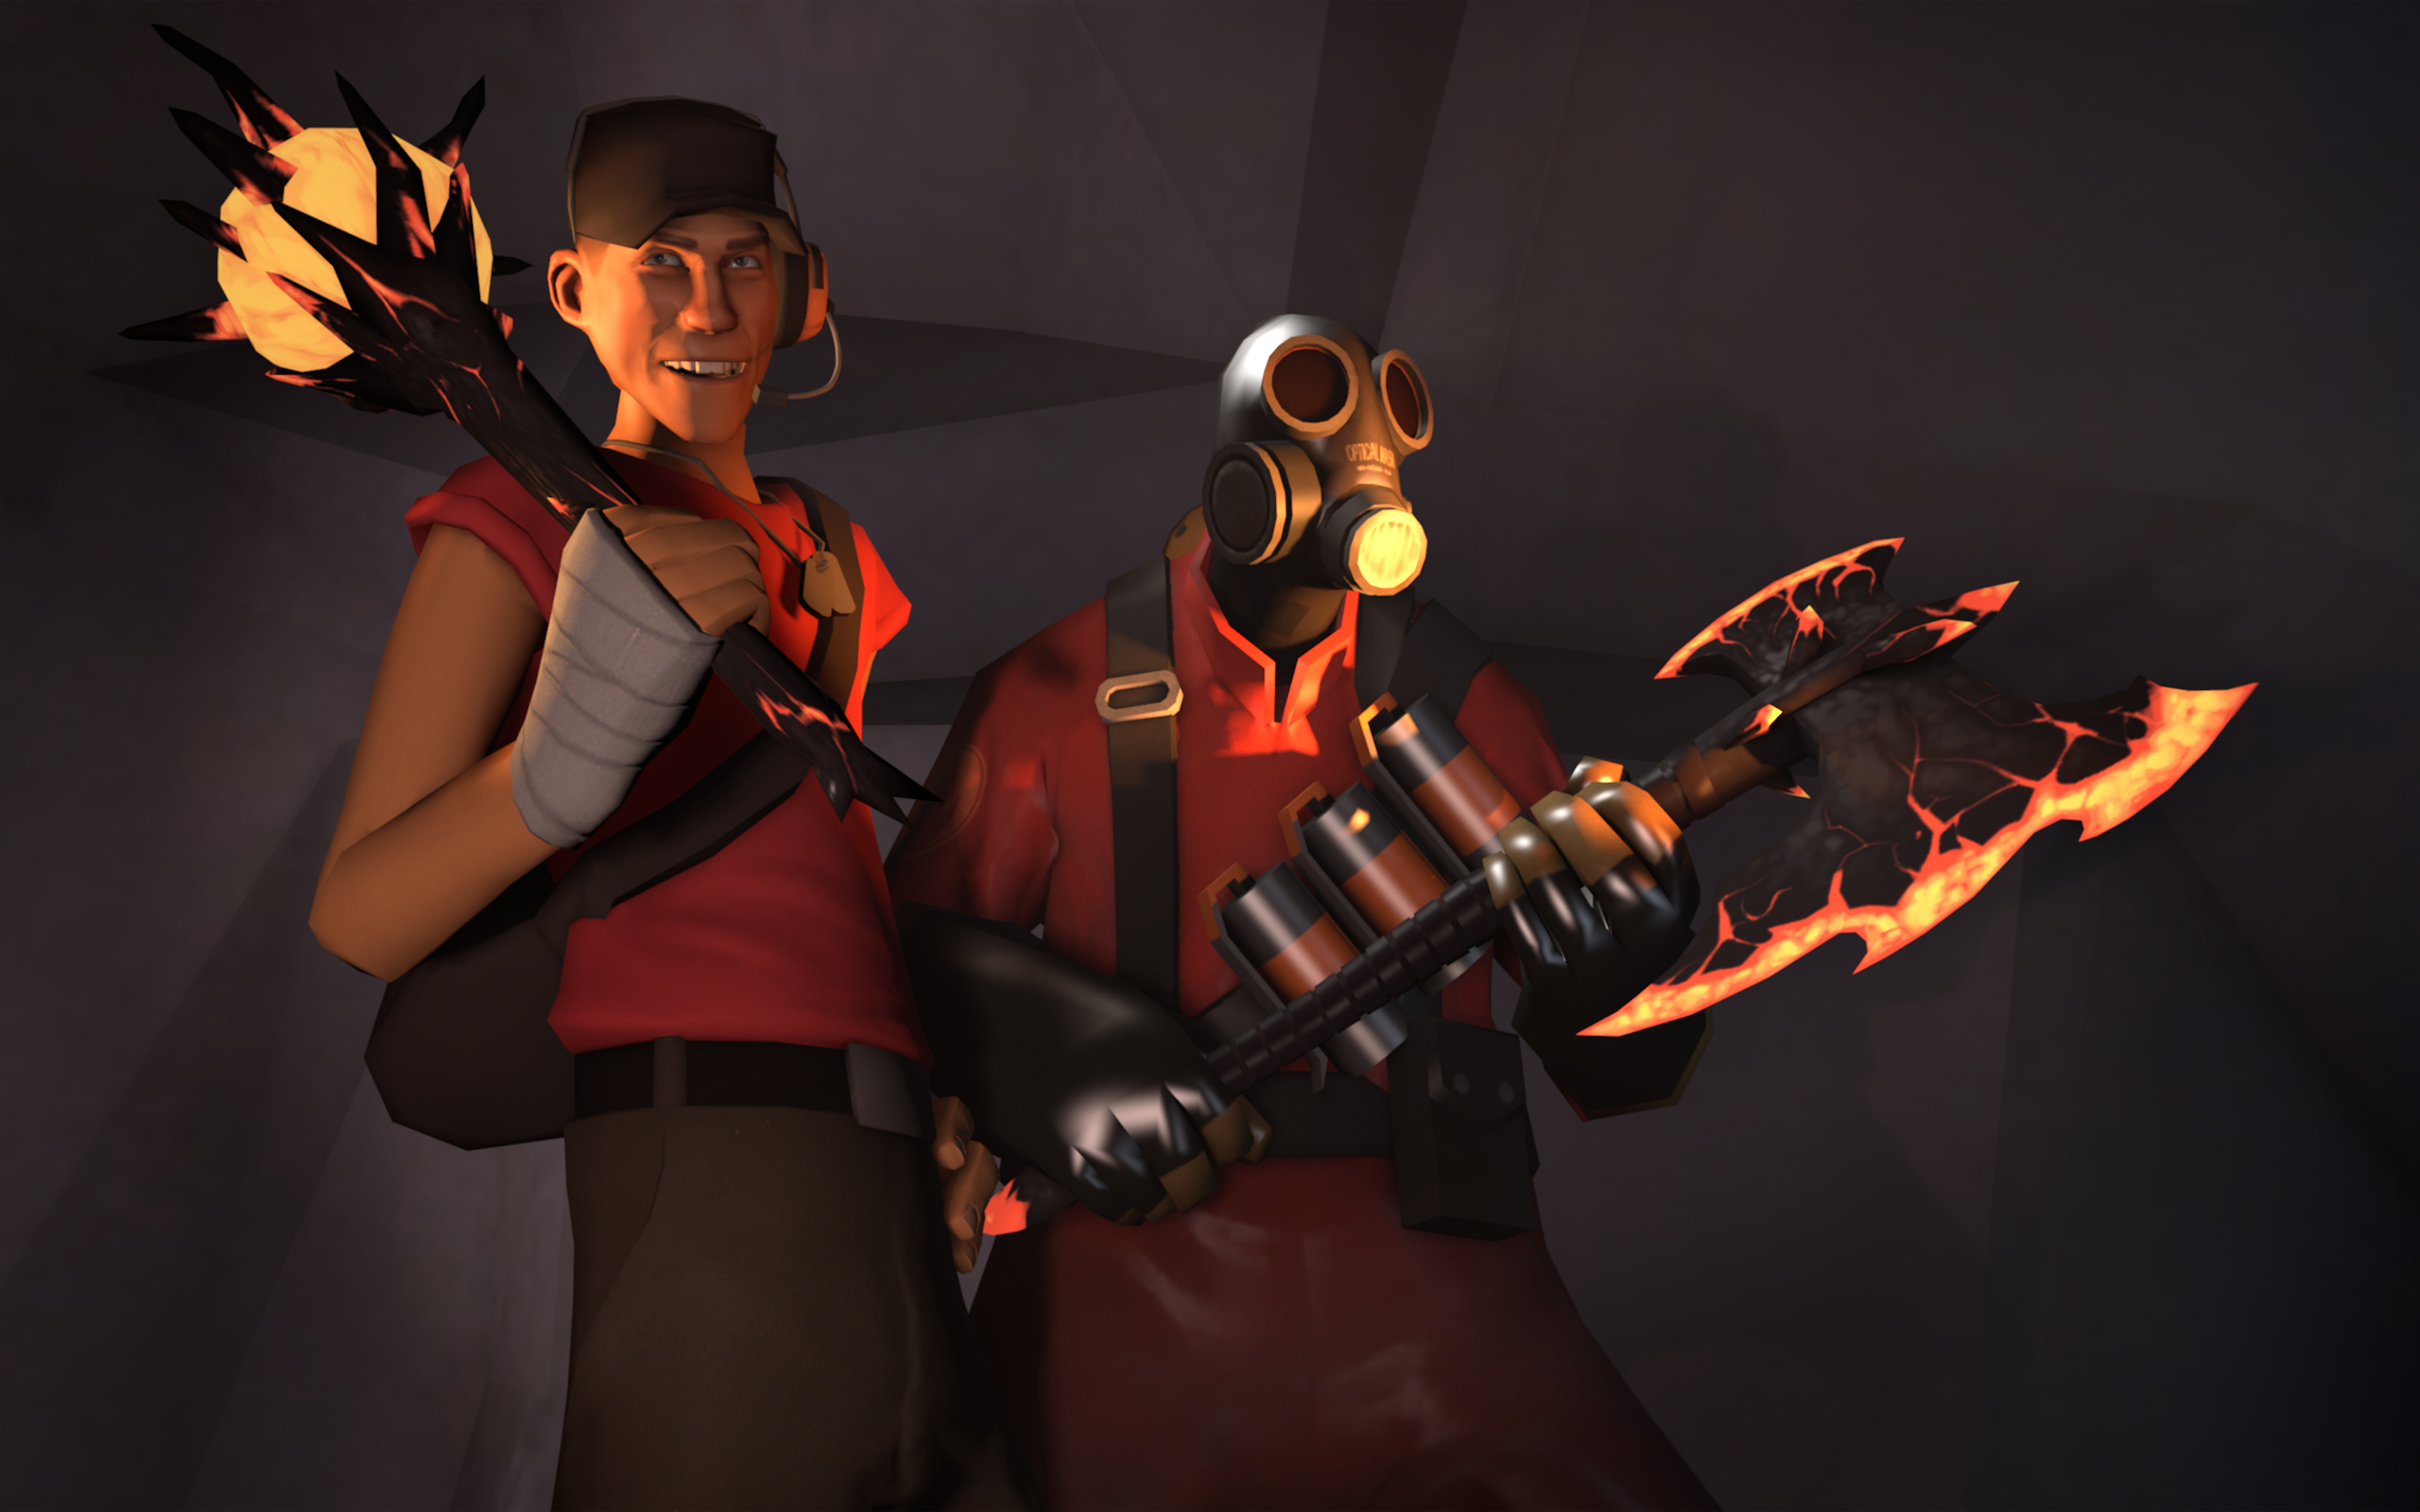 The Scout and the Pyro, two of the General Combat Classes.